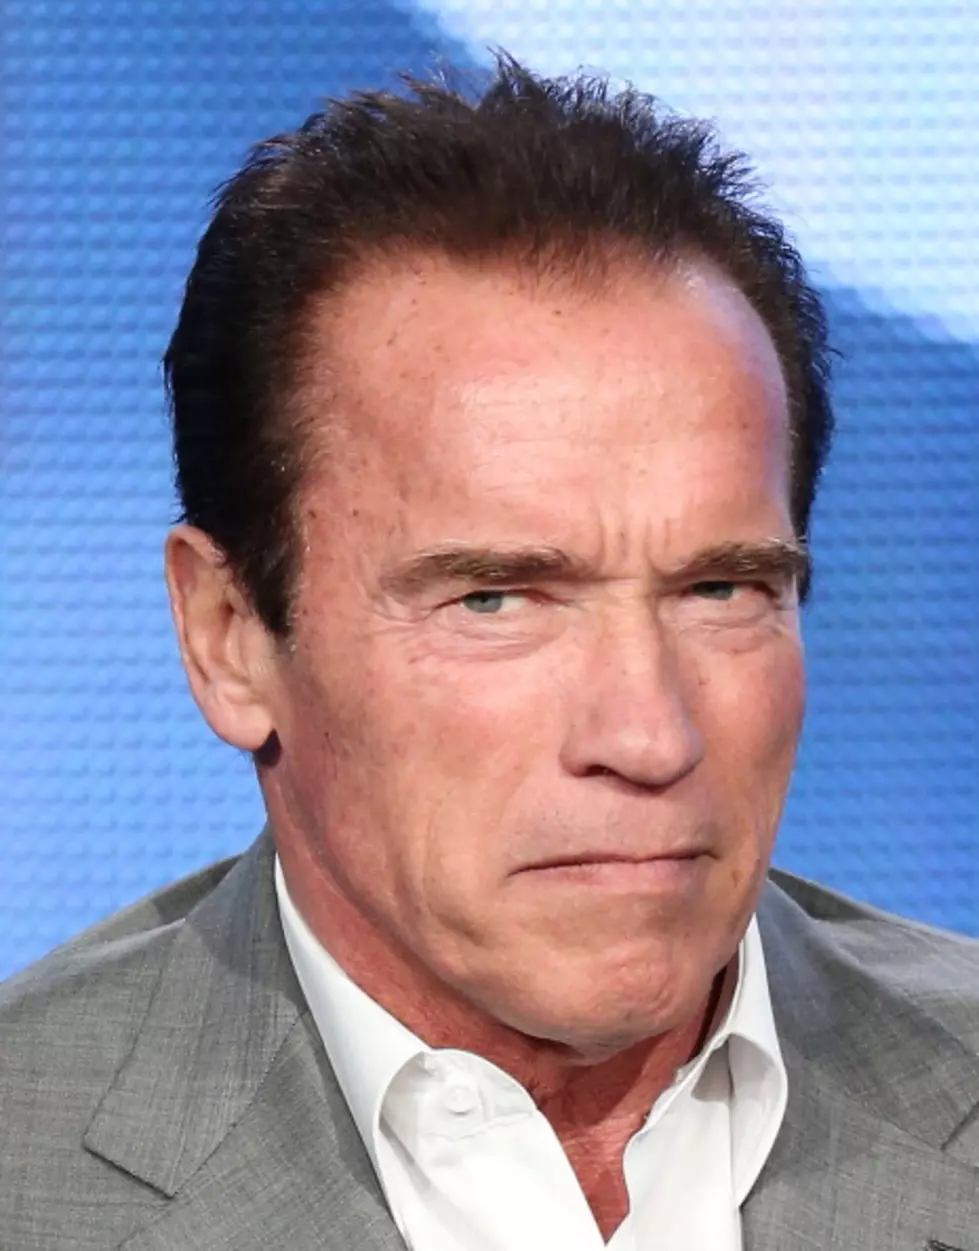 What’s Up With Arnold Schwarzenegger Playing Ping Pong in a Commercial?